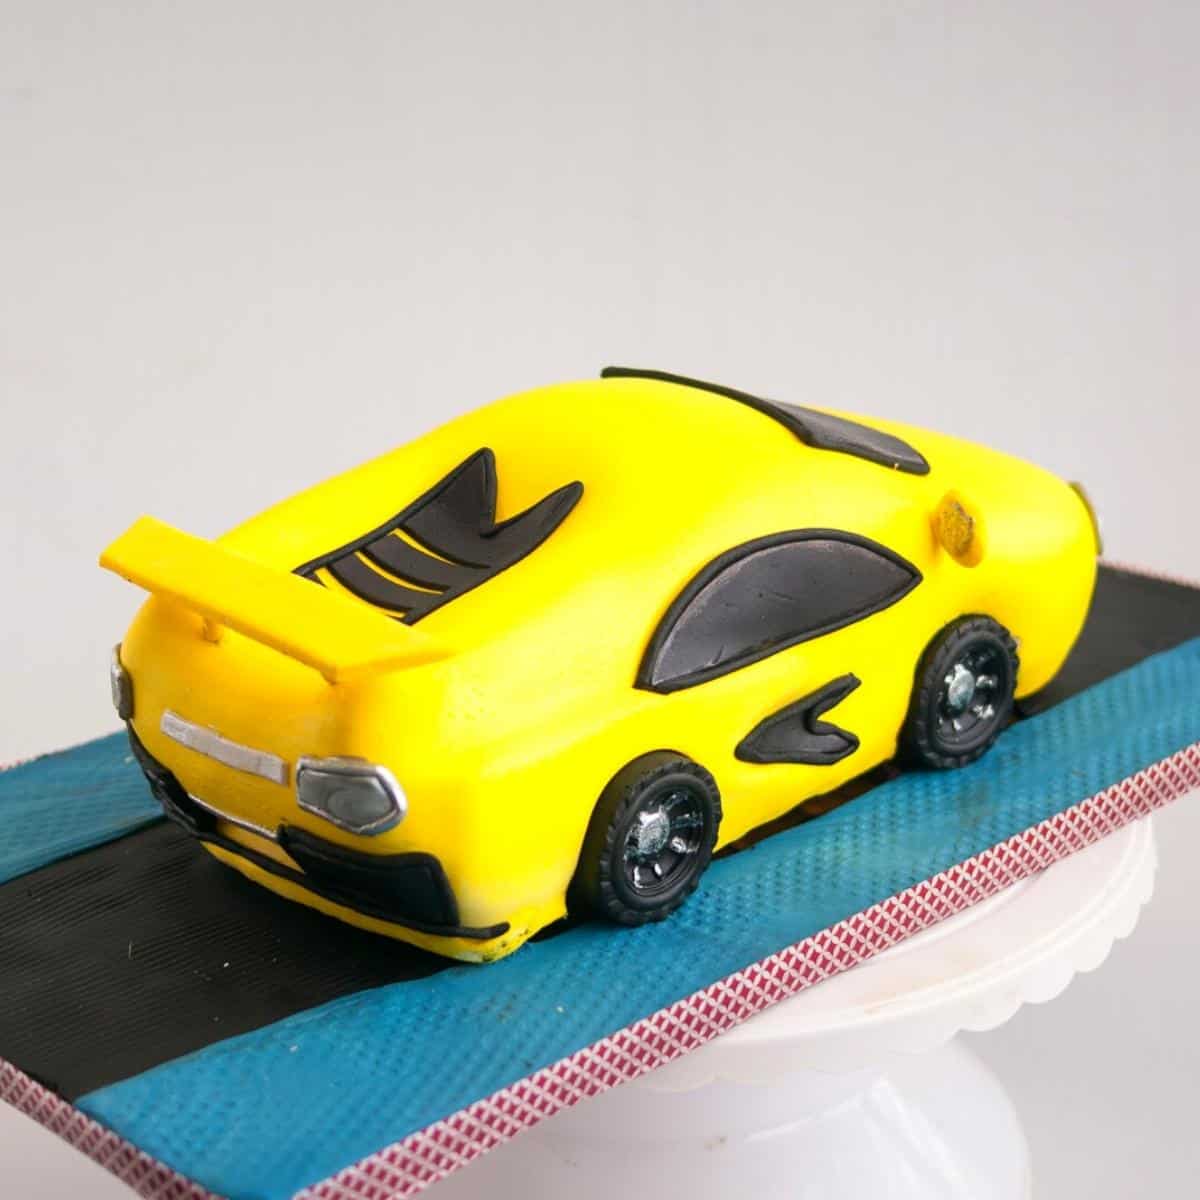 A cake board with cake shaped as a car.